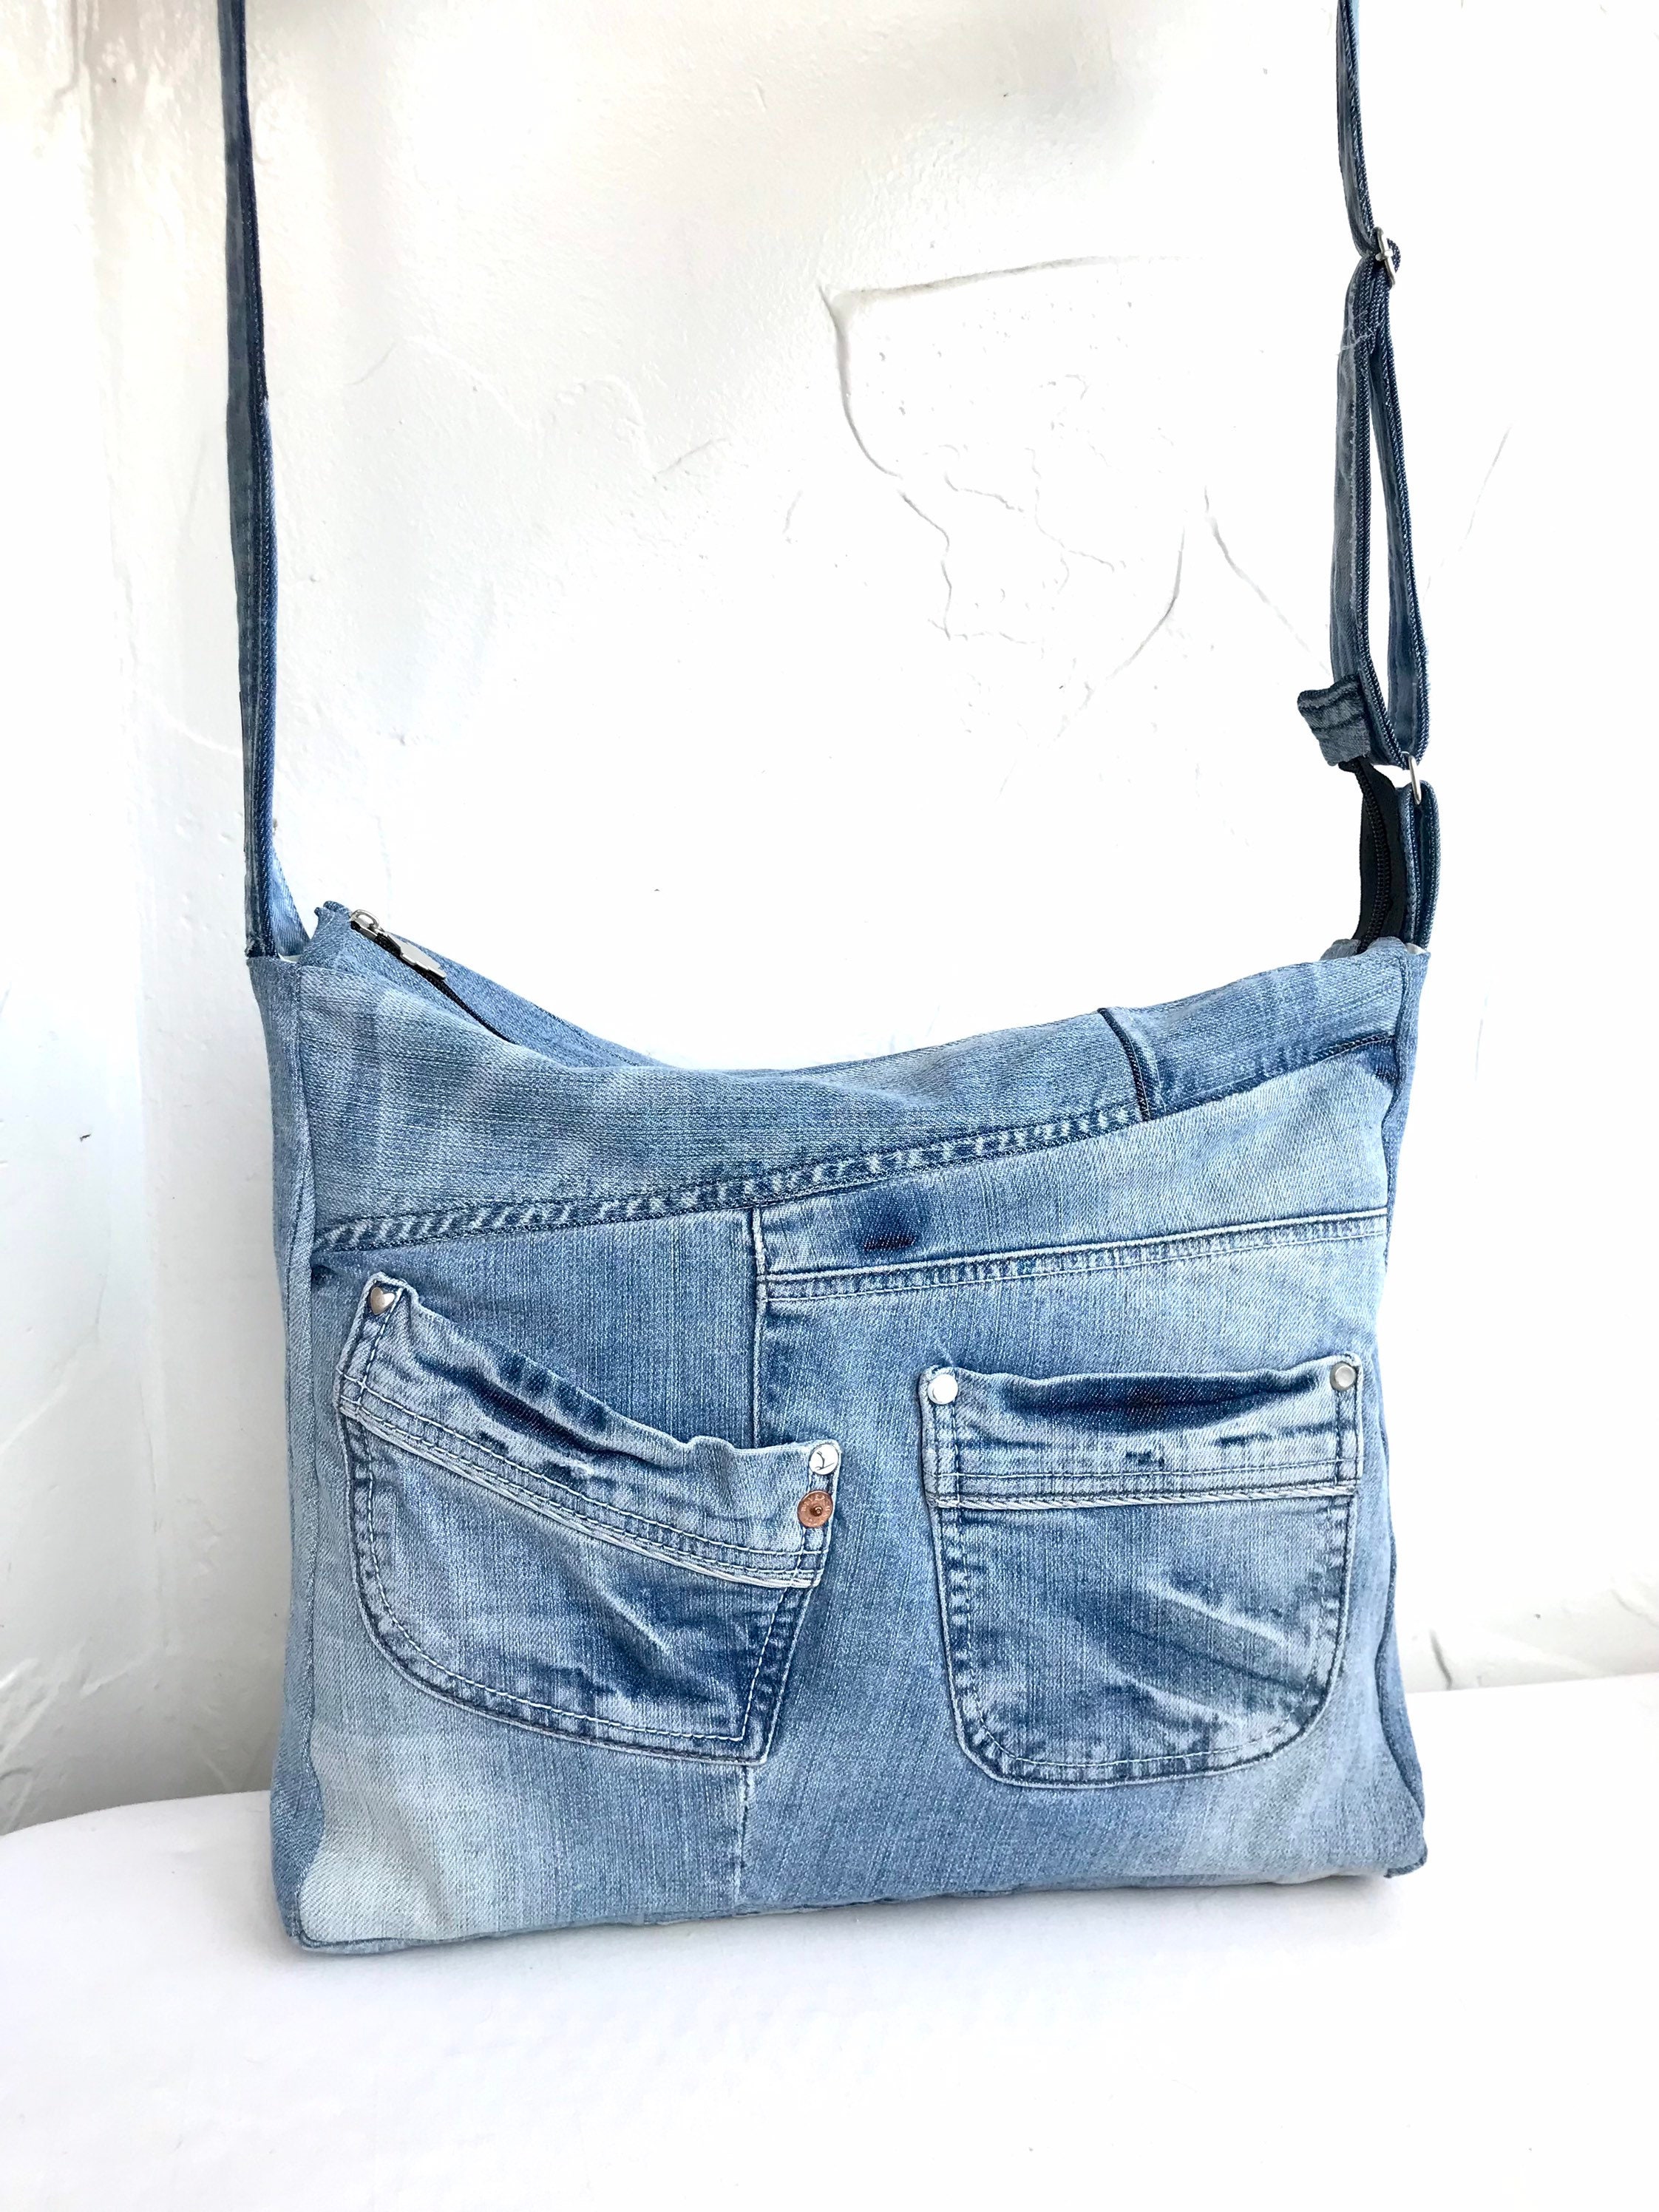 Recycled jeans Bags & Purses Luggage & Travel Briefcases & Attaches Casual denim laptop bag for college Denim notebook sleeve Jeans computer bag Travel document holder 